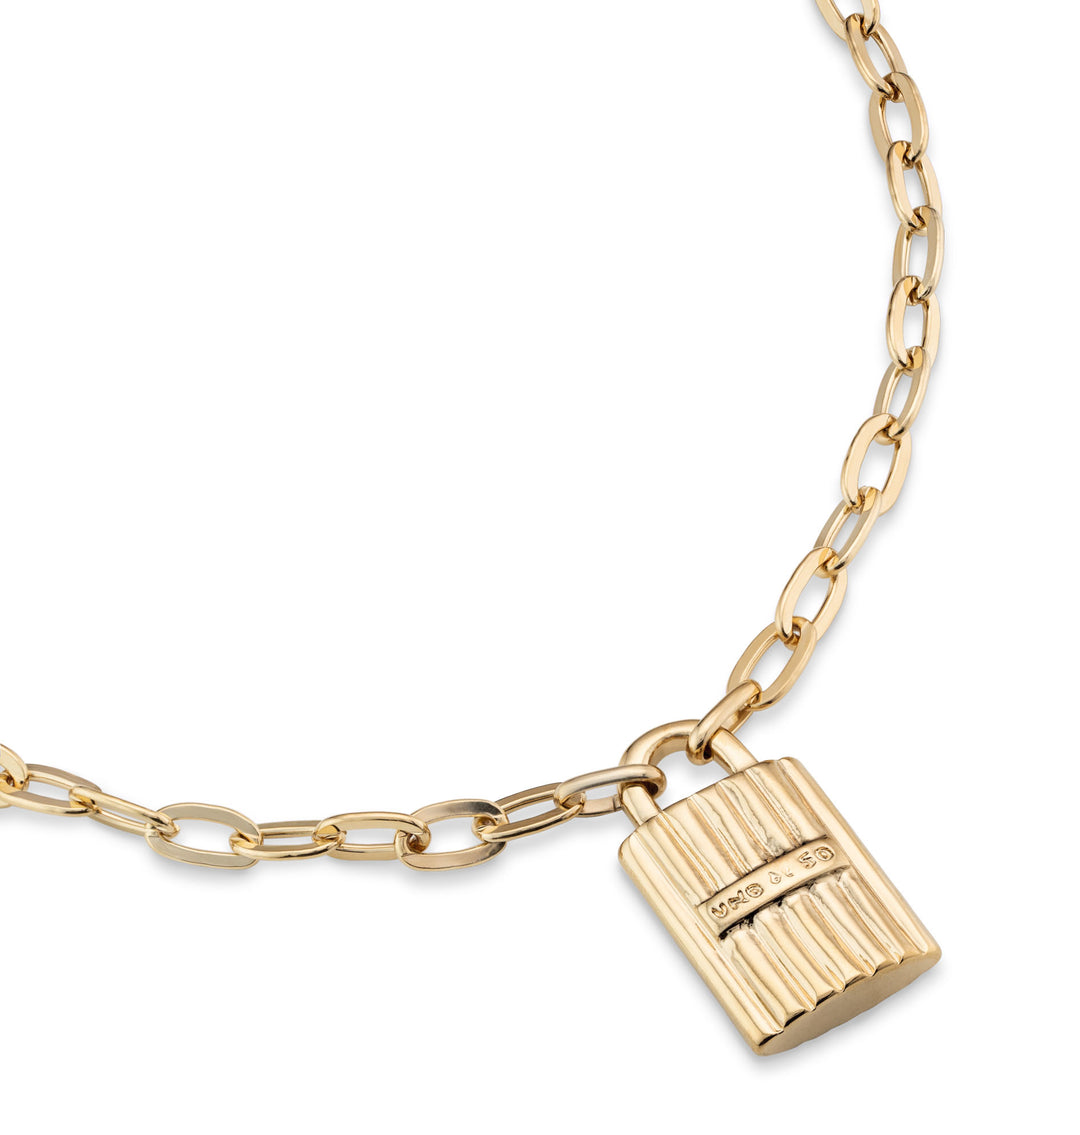 MAGIC KEY NECKLACE-GOLD - Kingfisher Road - Online Boutique